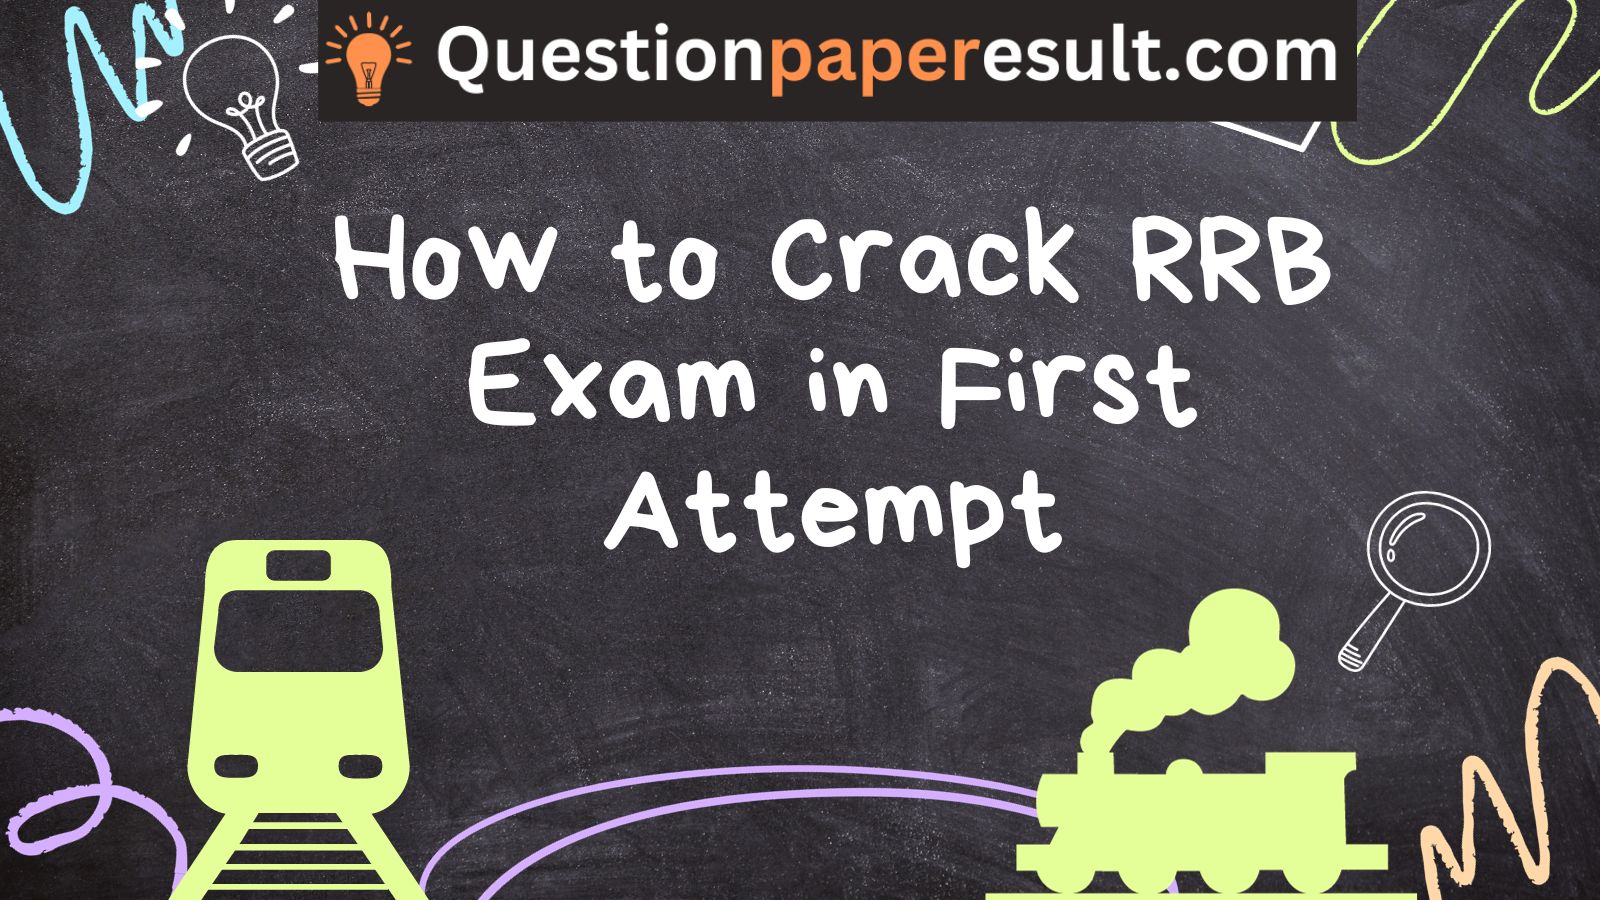 How to Crack RRB Exam in First Attempt